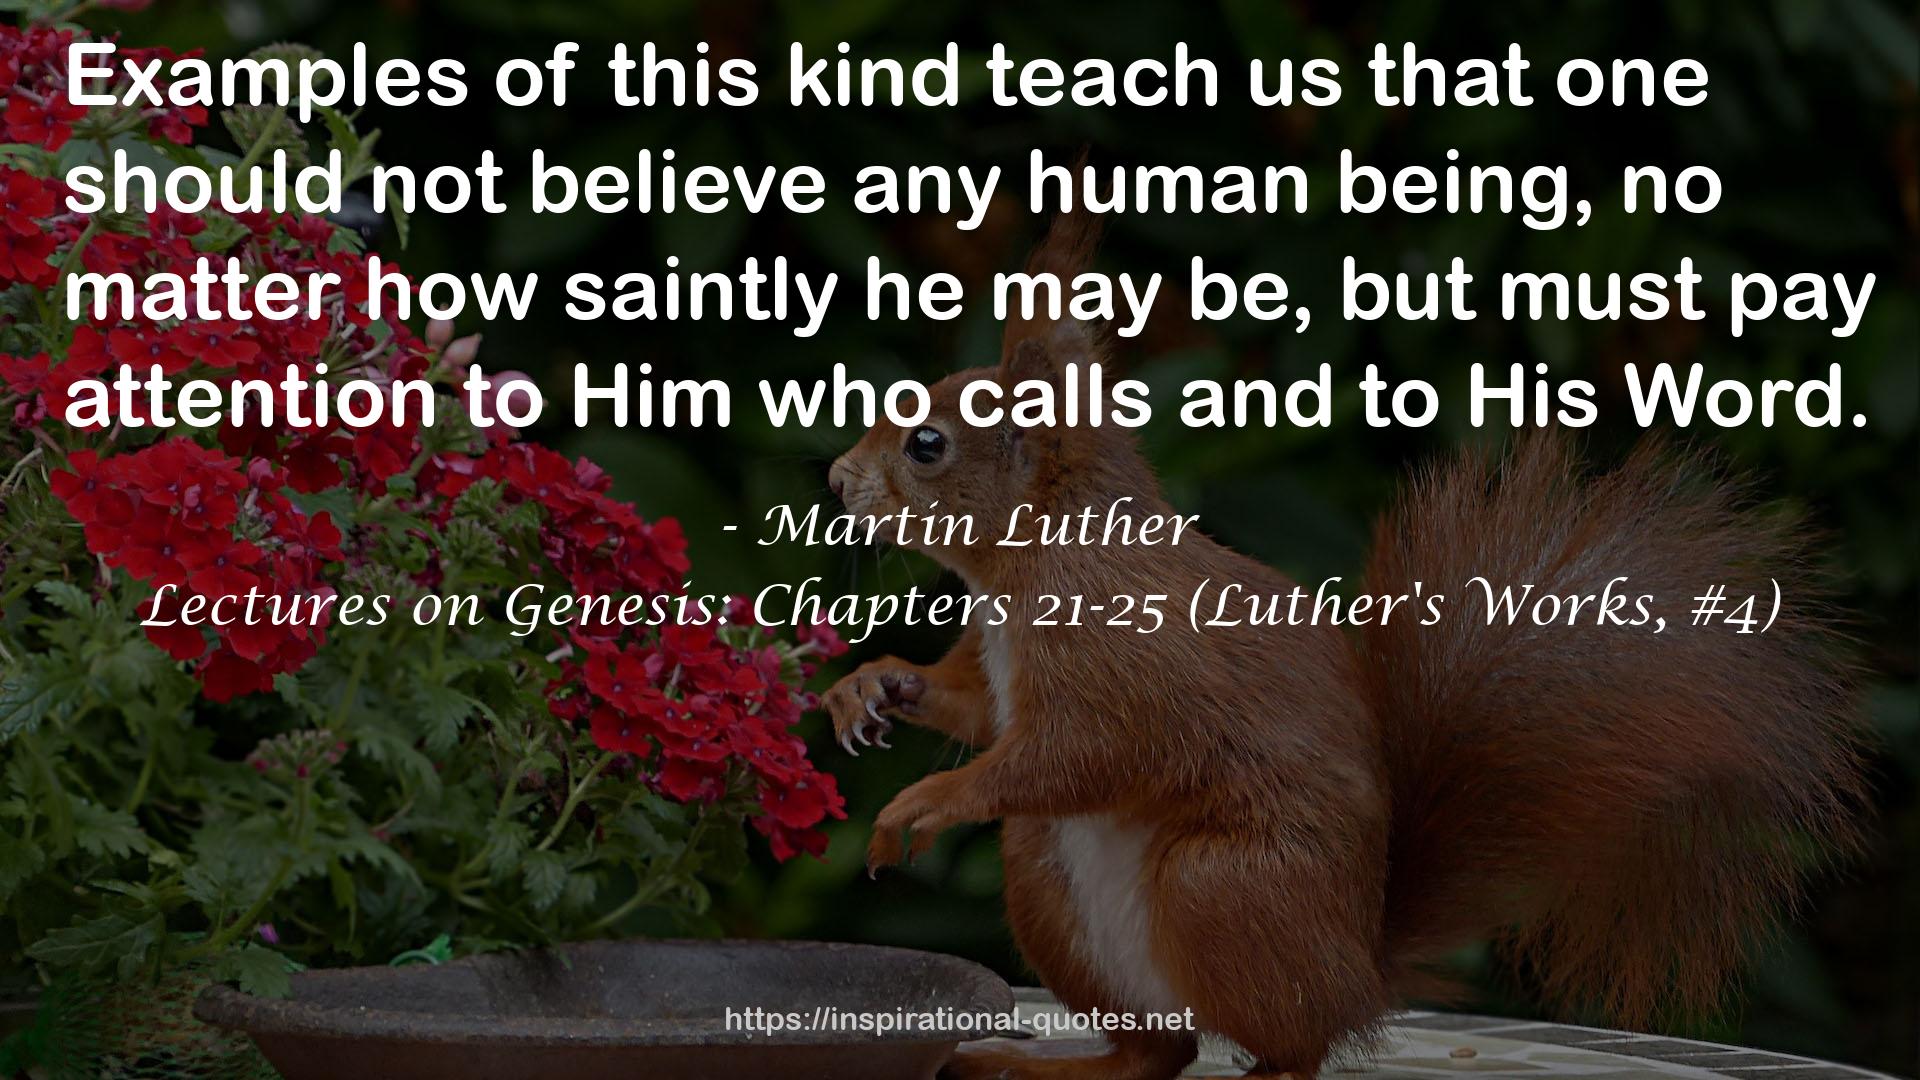 Lectures on Genesis: Chapters 21-25 (Luther's Works, #4) QUOTES